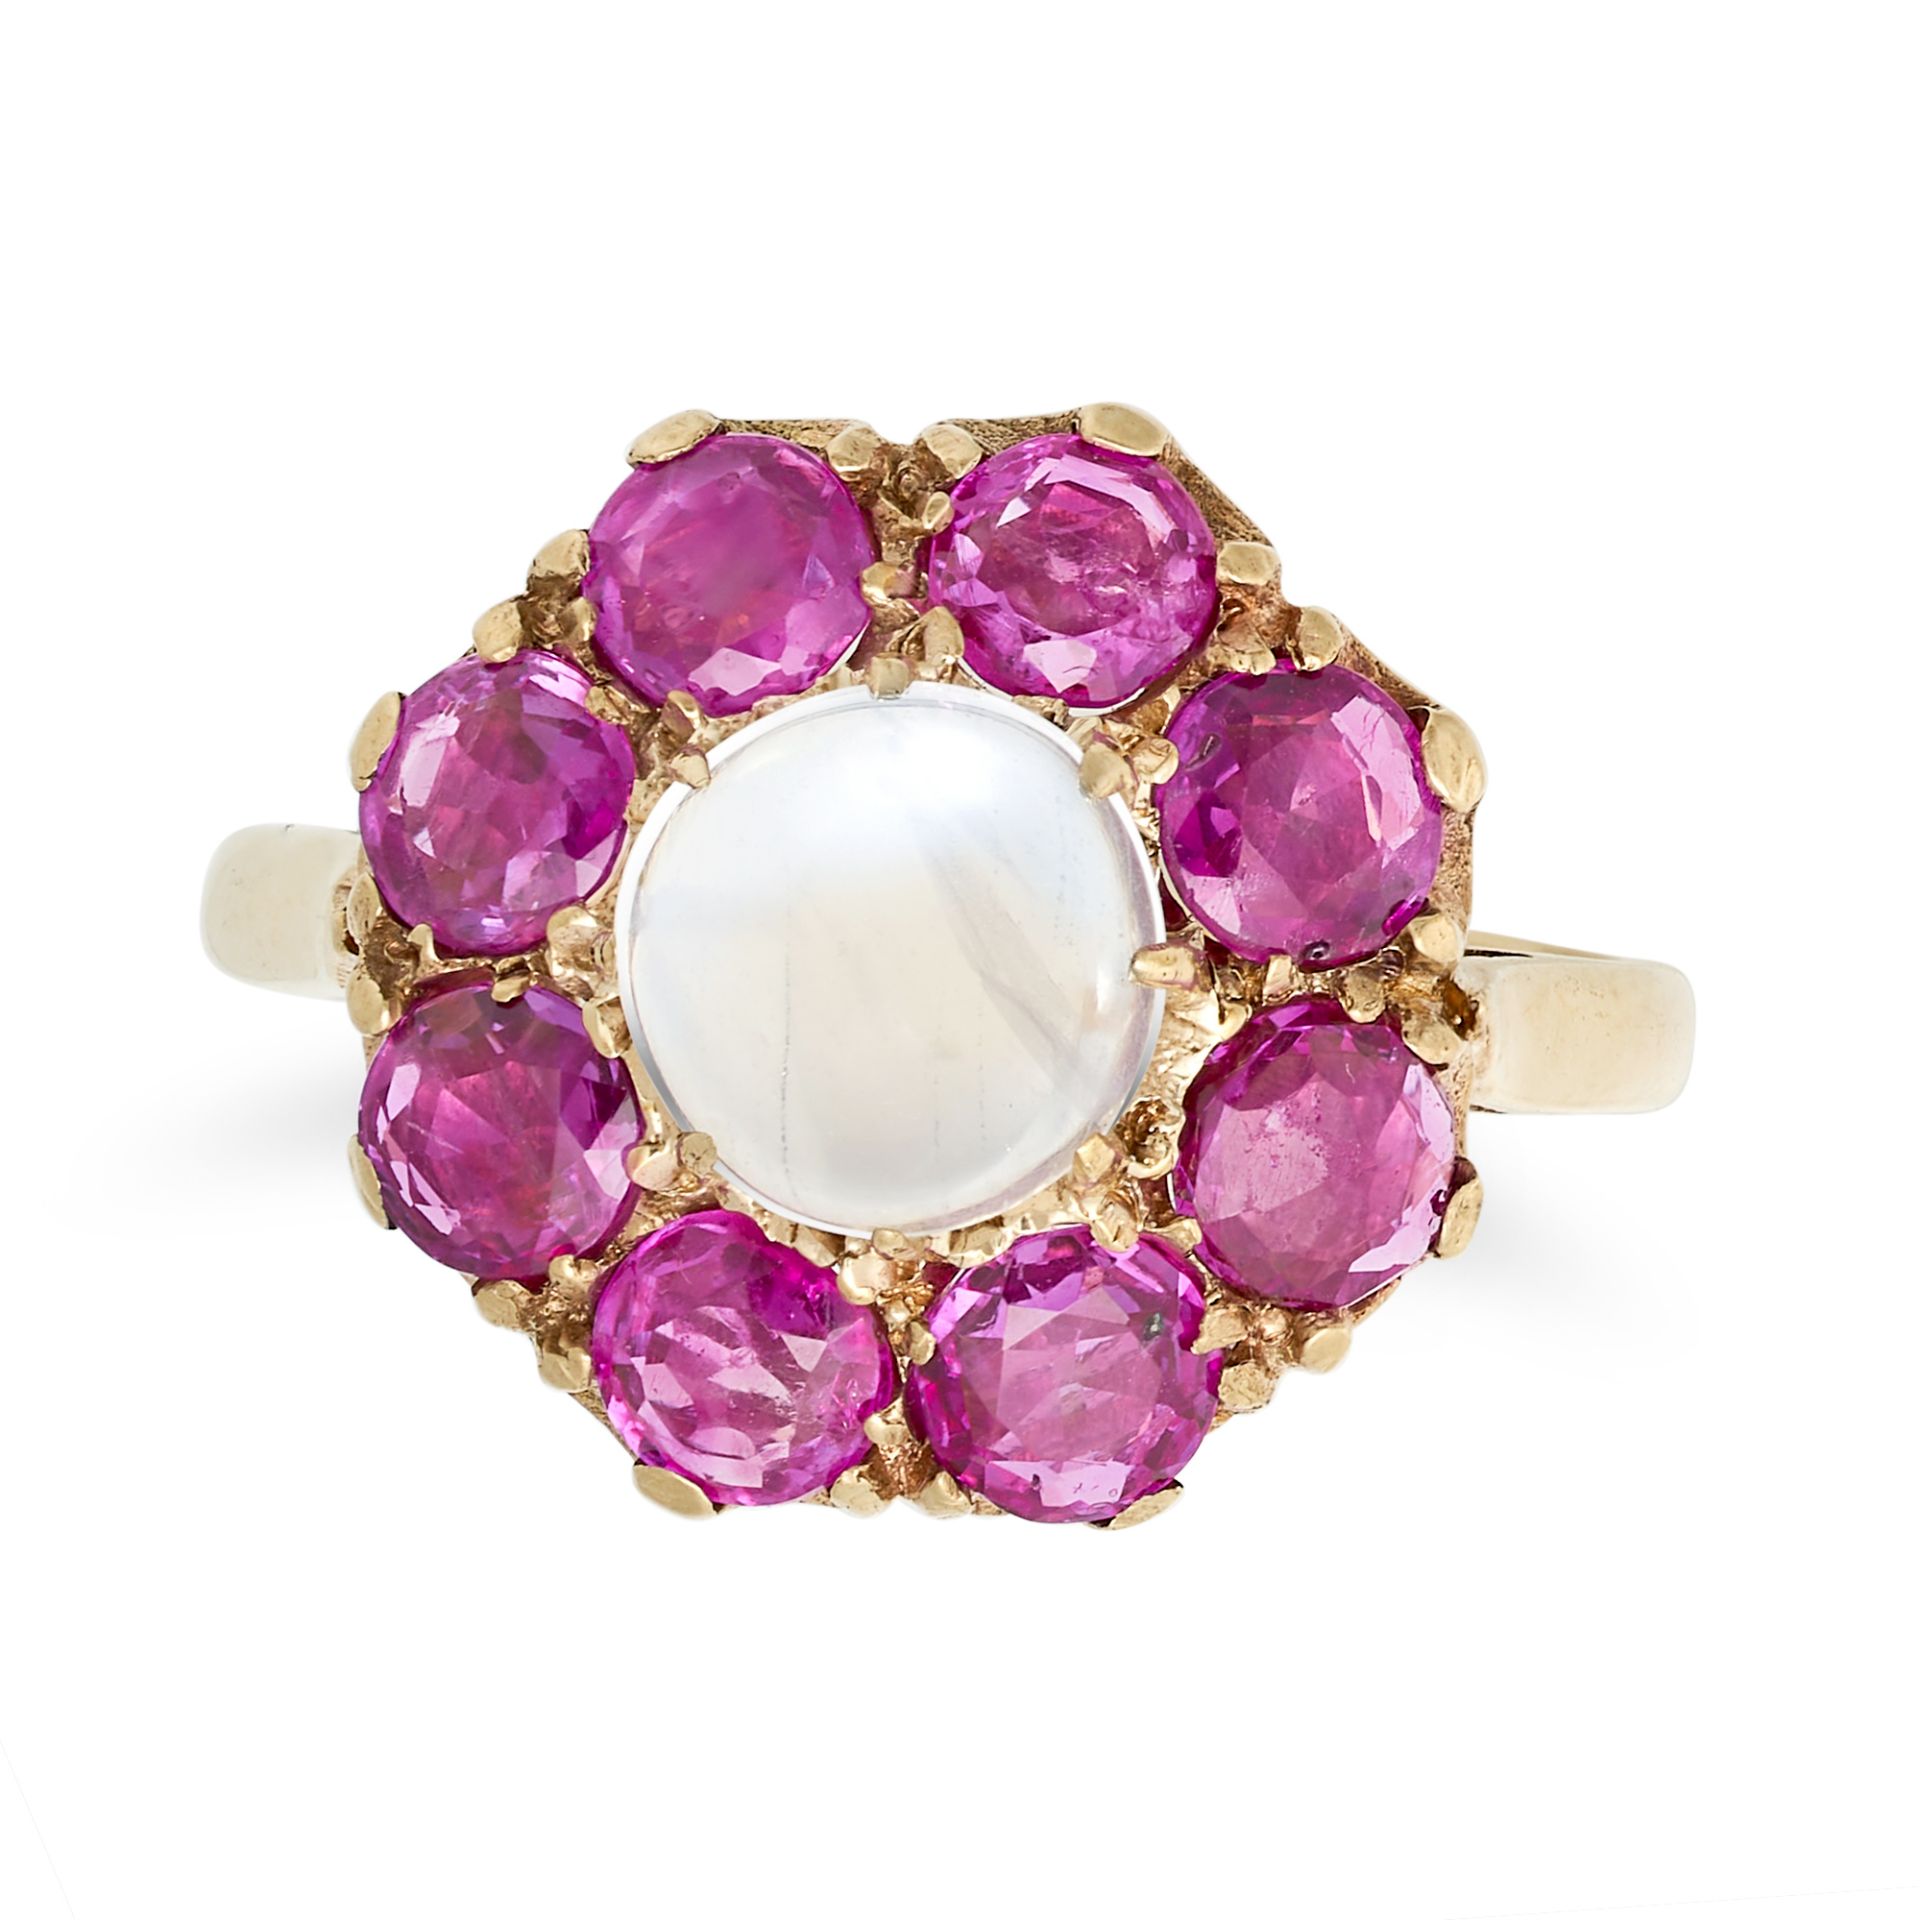 A MOONSTONE AND RUBY CLUSTER RING in 9ct yellow gold, set with a round cabochon moonstone in a cl...